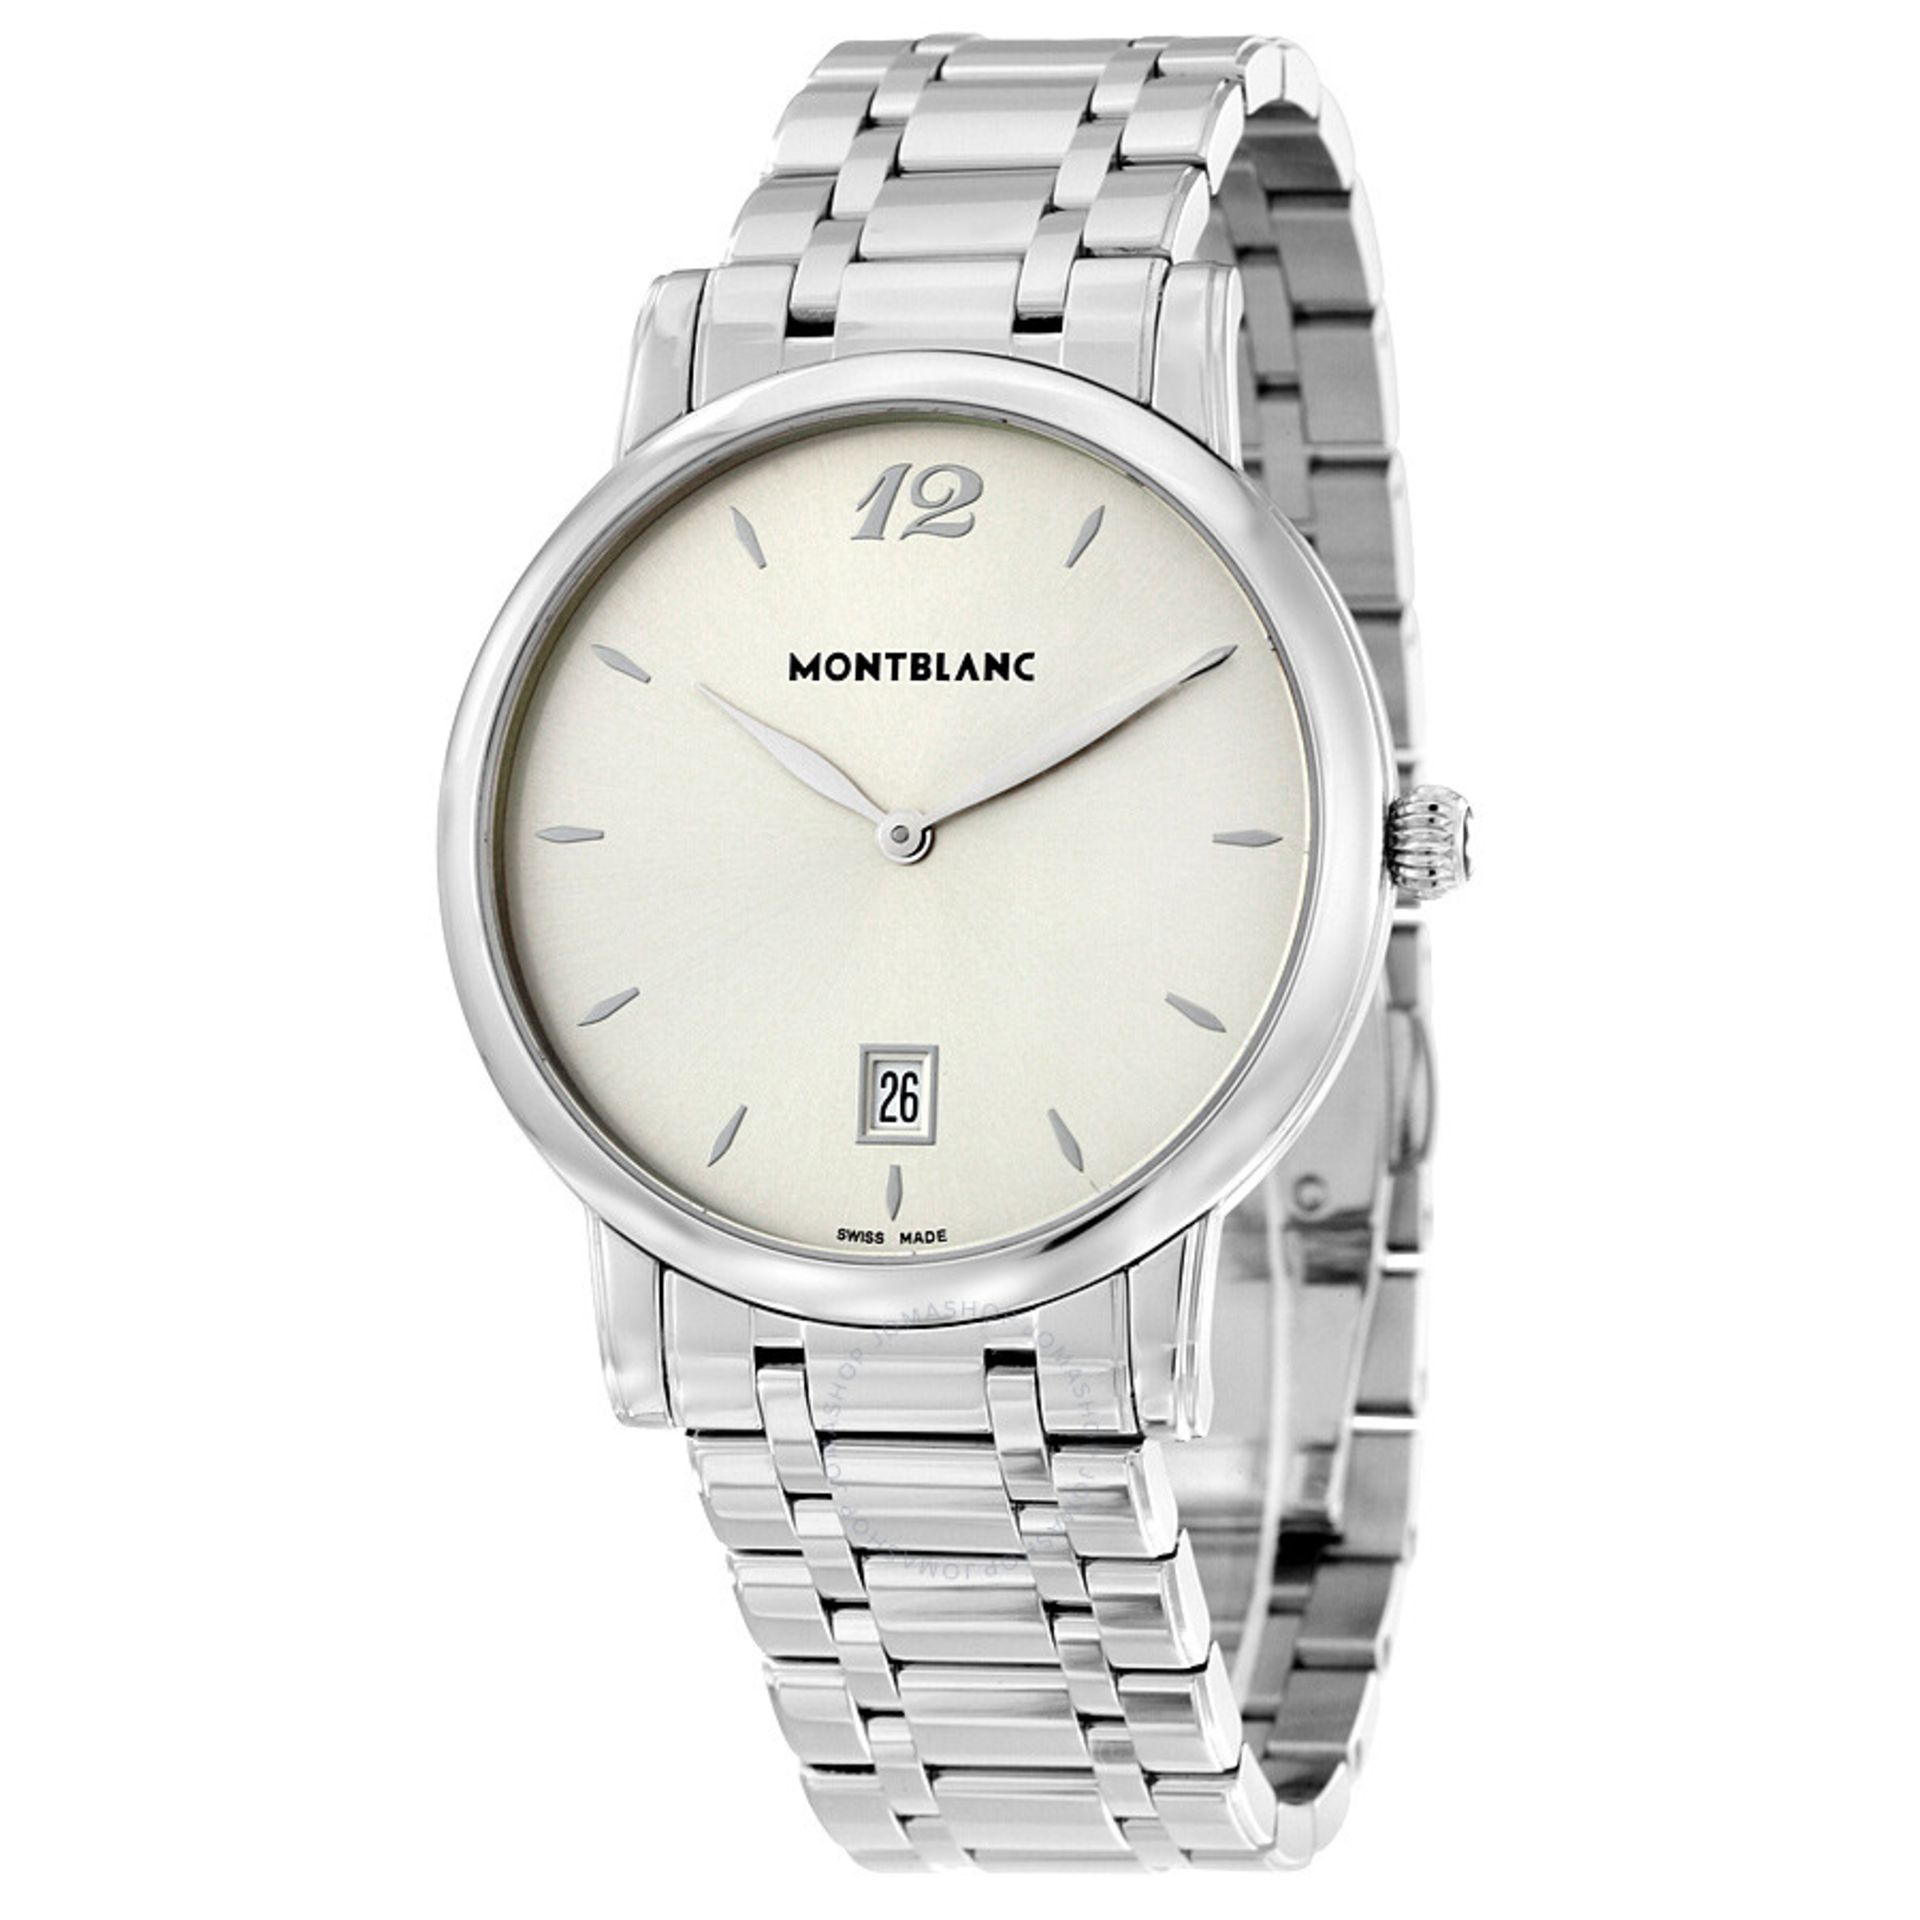 BRAND NEW Montblanc Star Classique Silver Dial Stainless Steel Mens Watch (218) RRP £2400